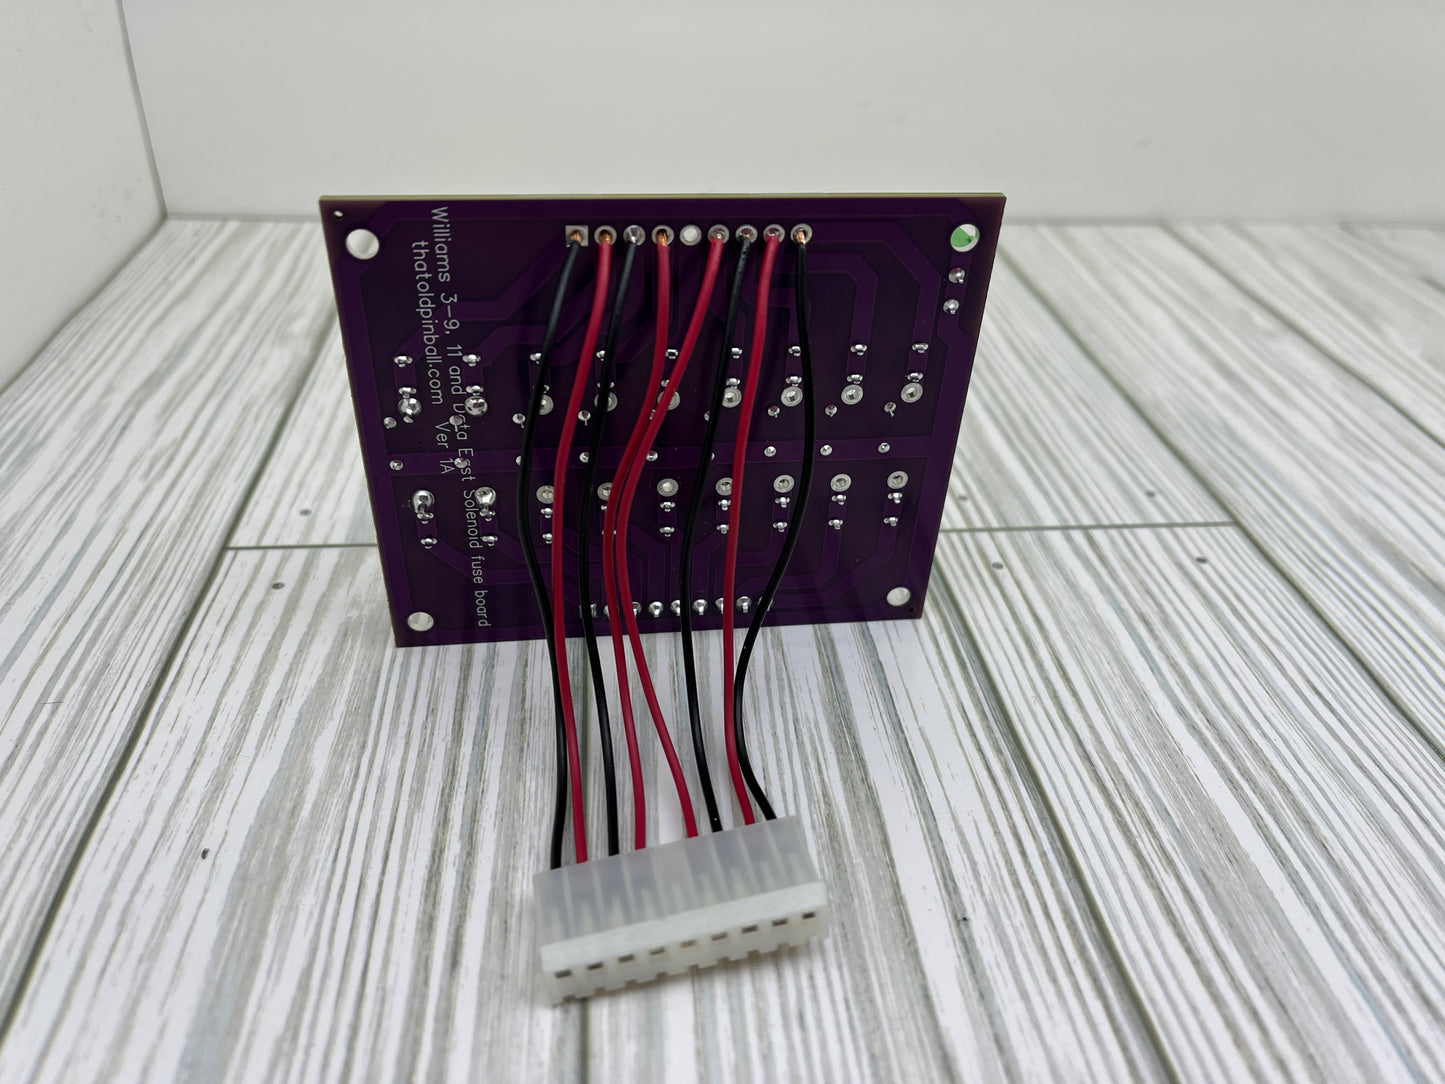 Solenoid Saver Board - All in one. Williams / Data East / Sega / Stern with LED indicators